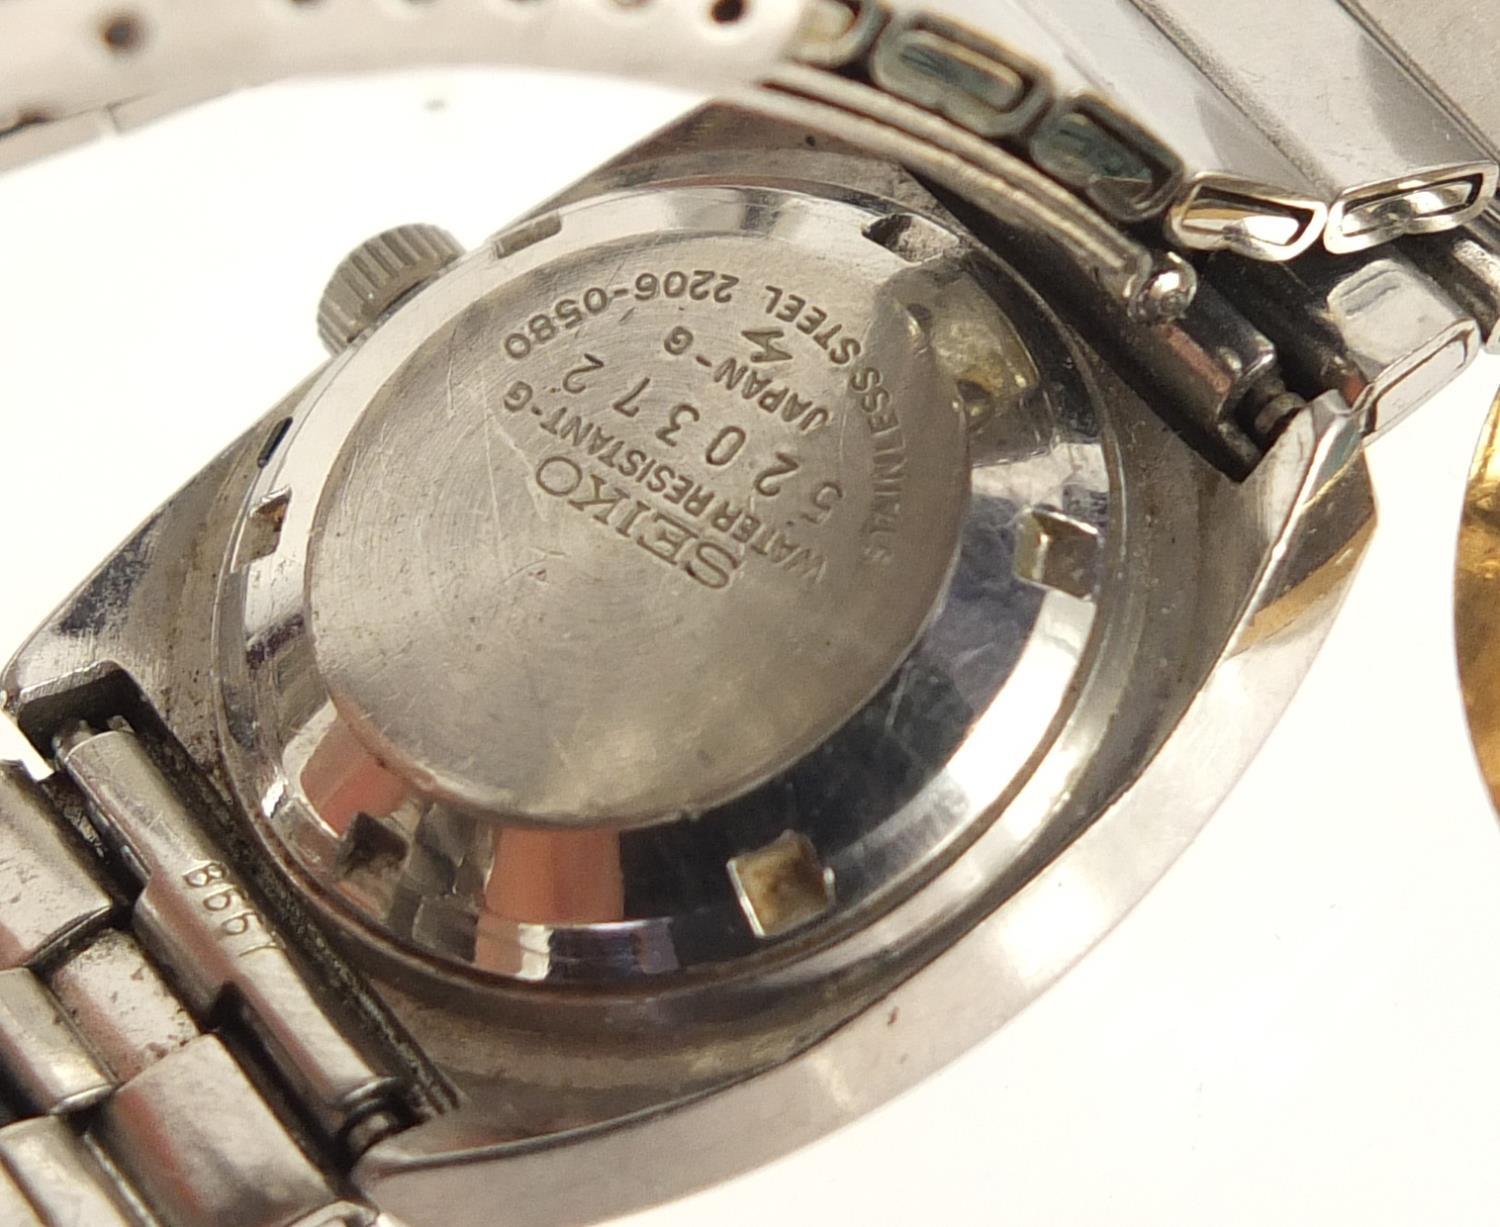 Four vintage wristwatches including Seiko 5 Automatic, Federal and Oris : For Further Condition - Image 9 of 9